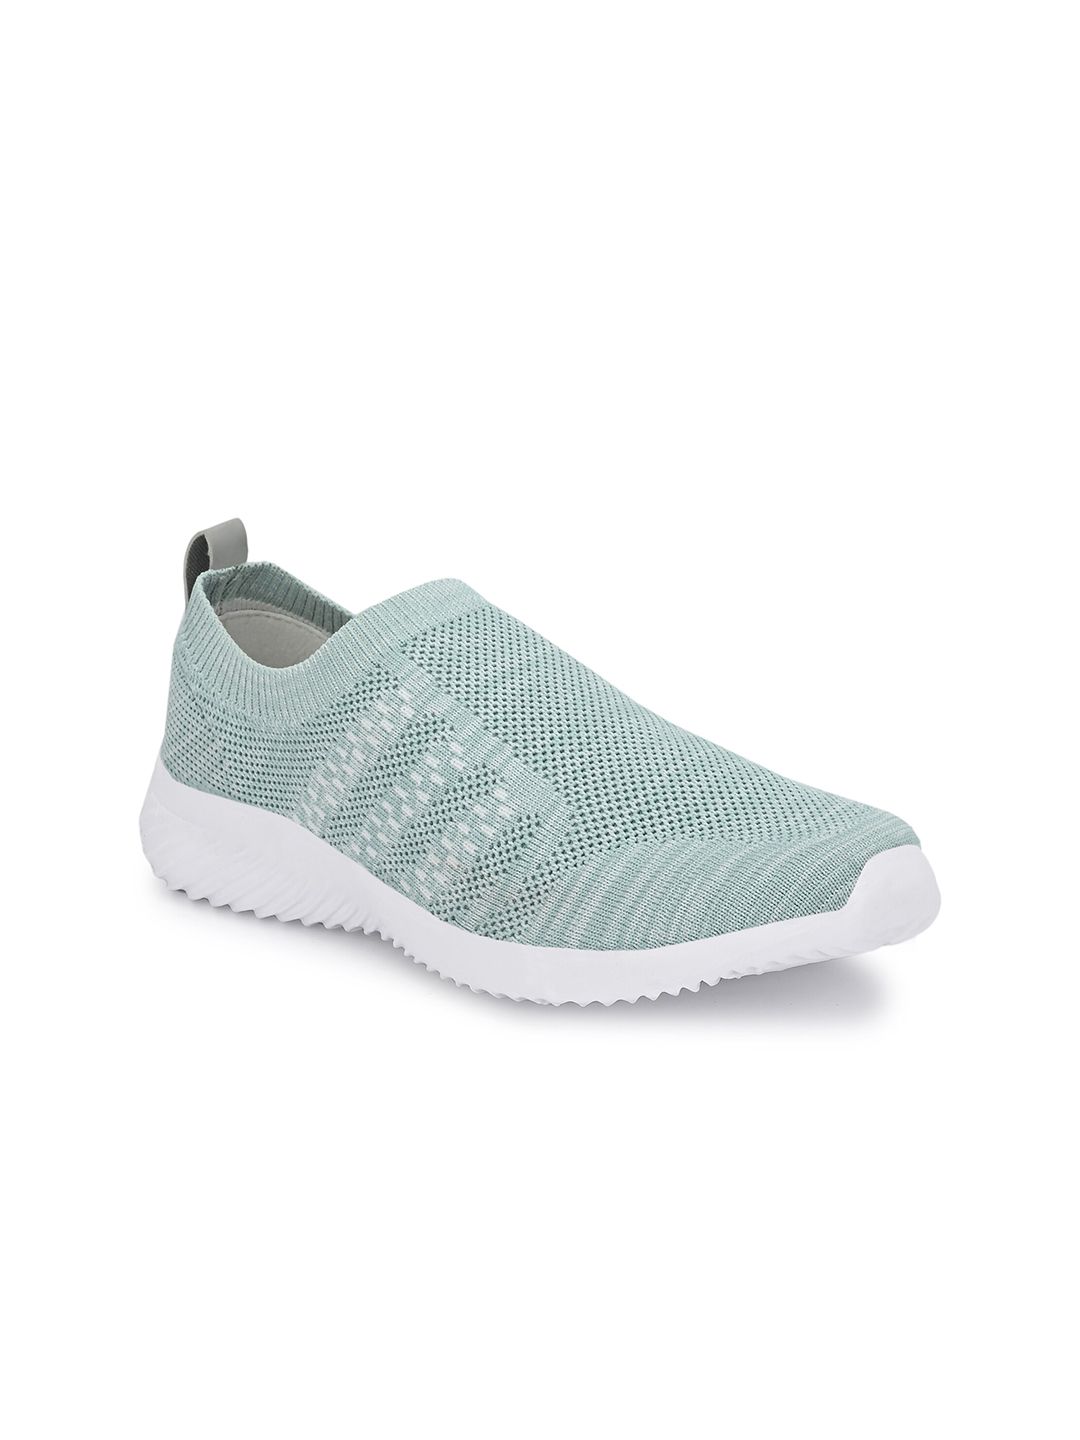 OFF LIMITS Women Green Mesh Walking Non-Marking Shoes Price in India